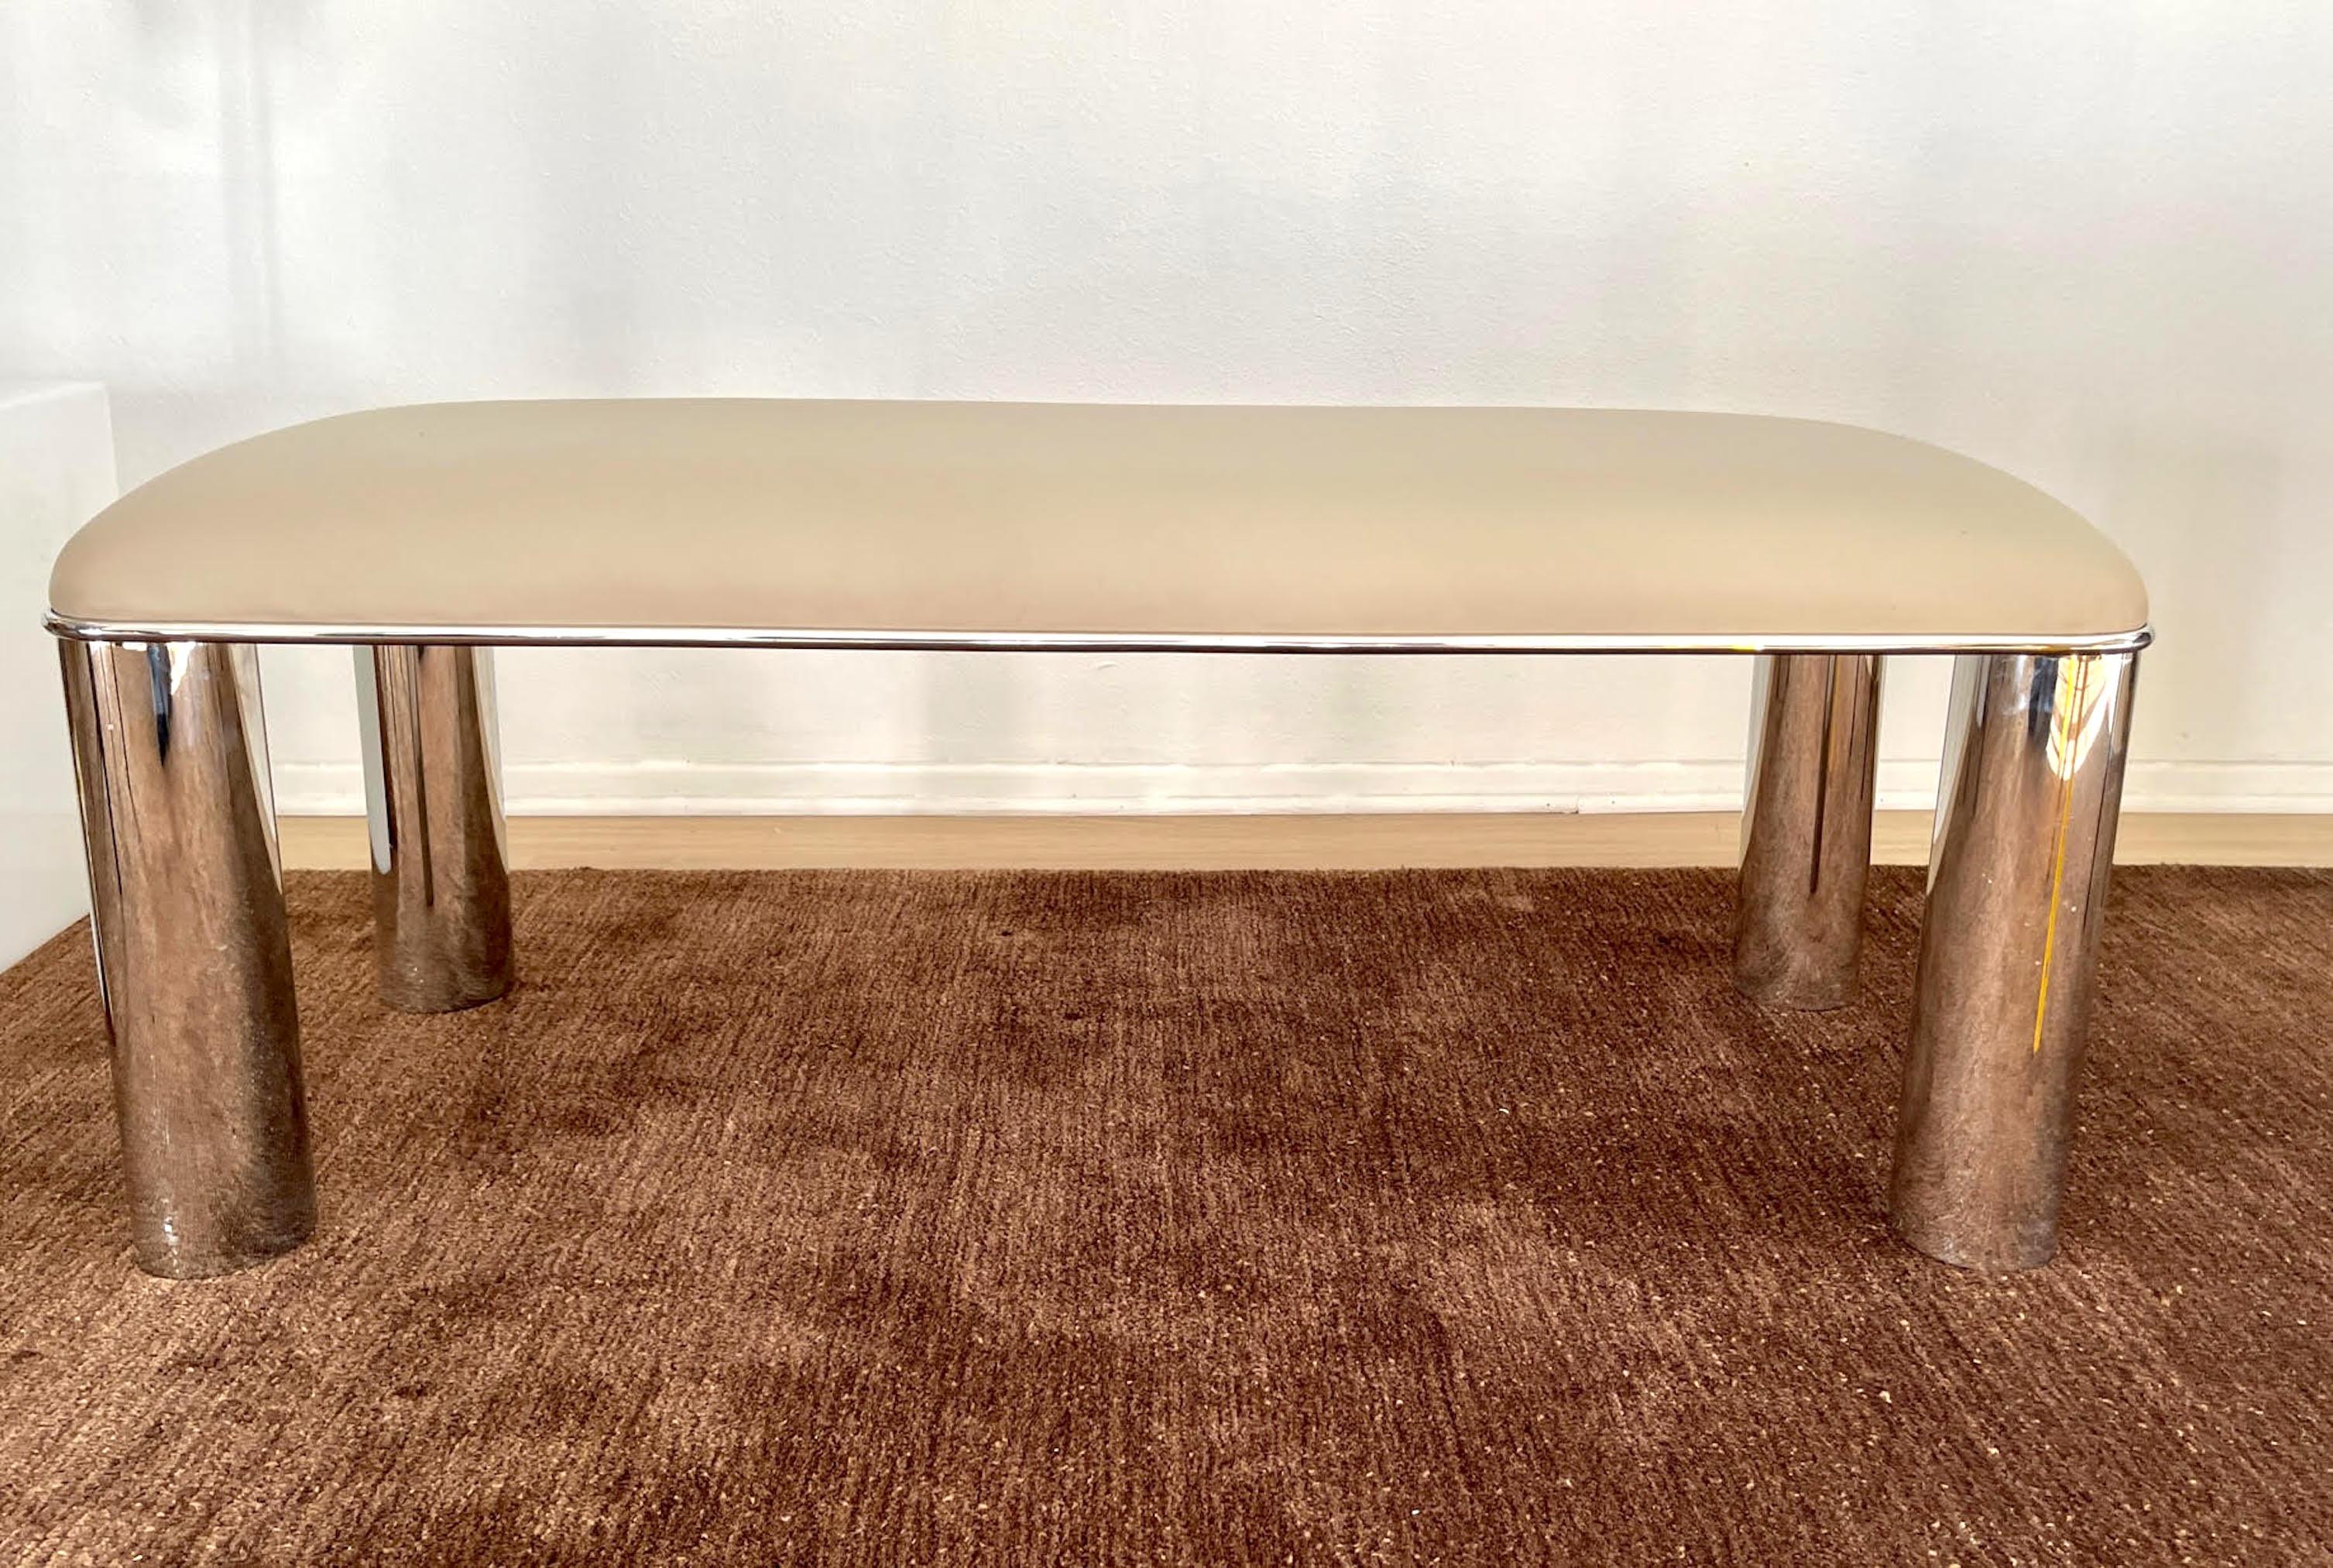 Upholstered Beige Leather Bench with polished steel legs and edge. 
Supported underneath with a steel cross frame. Excellent quality, heavy, sturdy, and ready for use.